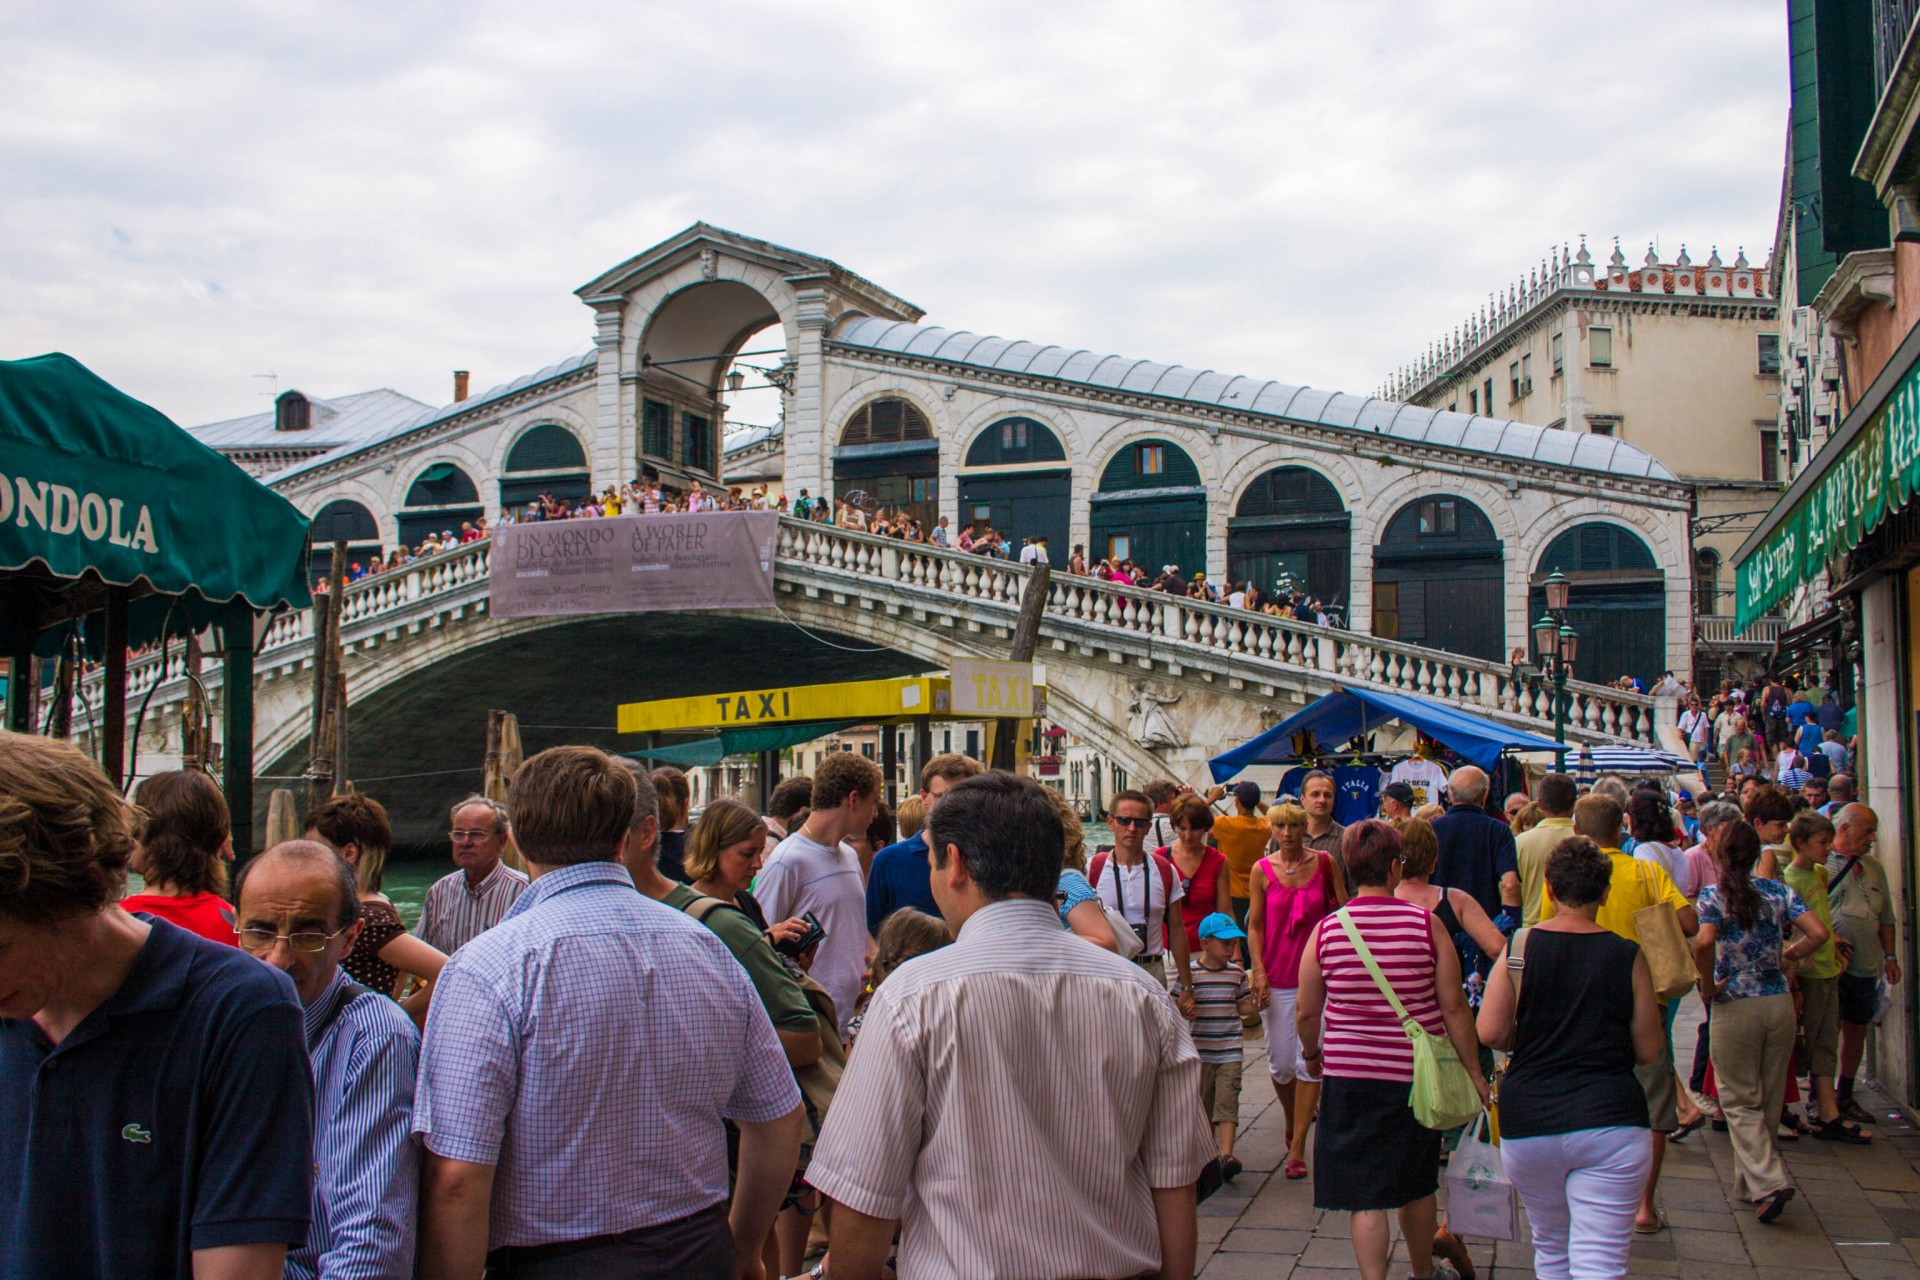 Crowds of tourists fill the bridges and squares of Venice, Italy - Lost in Venice